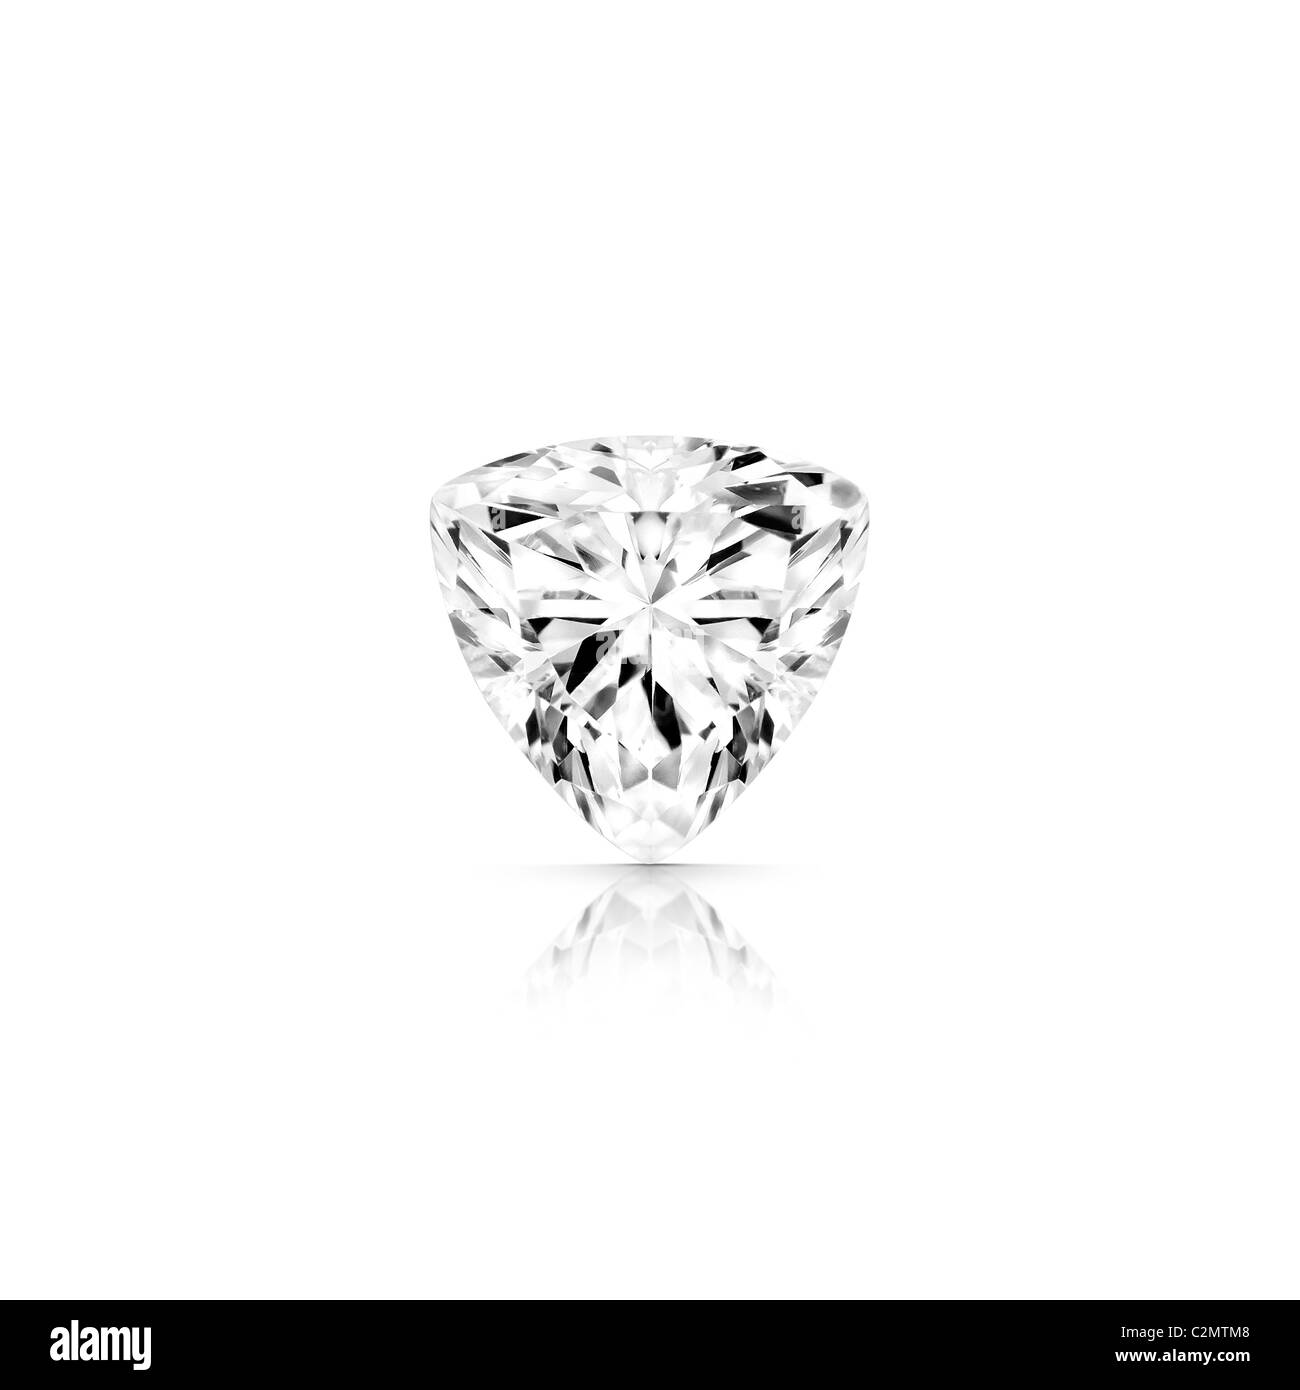 trillion cut Greyscale diamond isolated on white background with partial reflection and clipping path Stock Photo